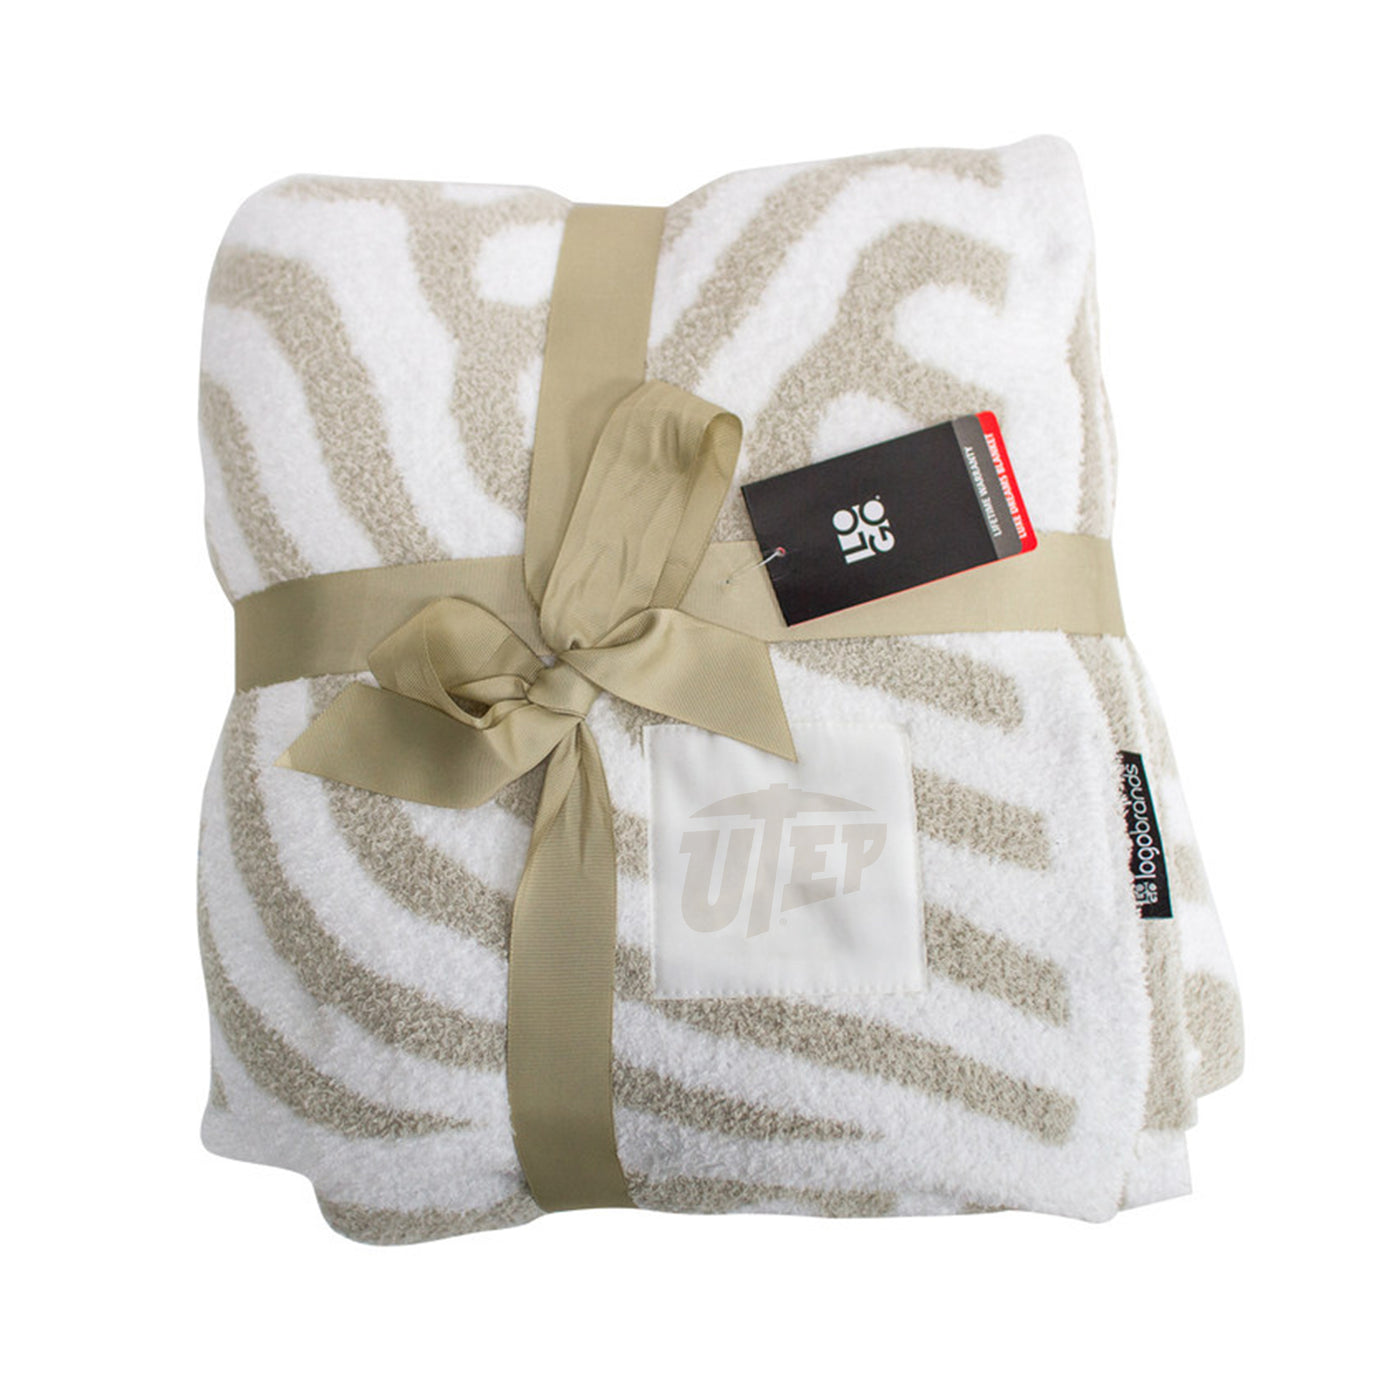 UTEP Luxe Dreams Throw